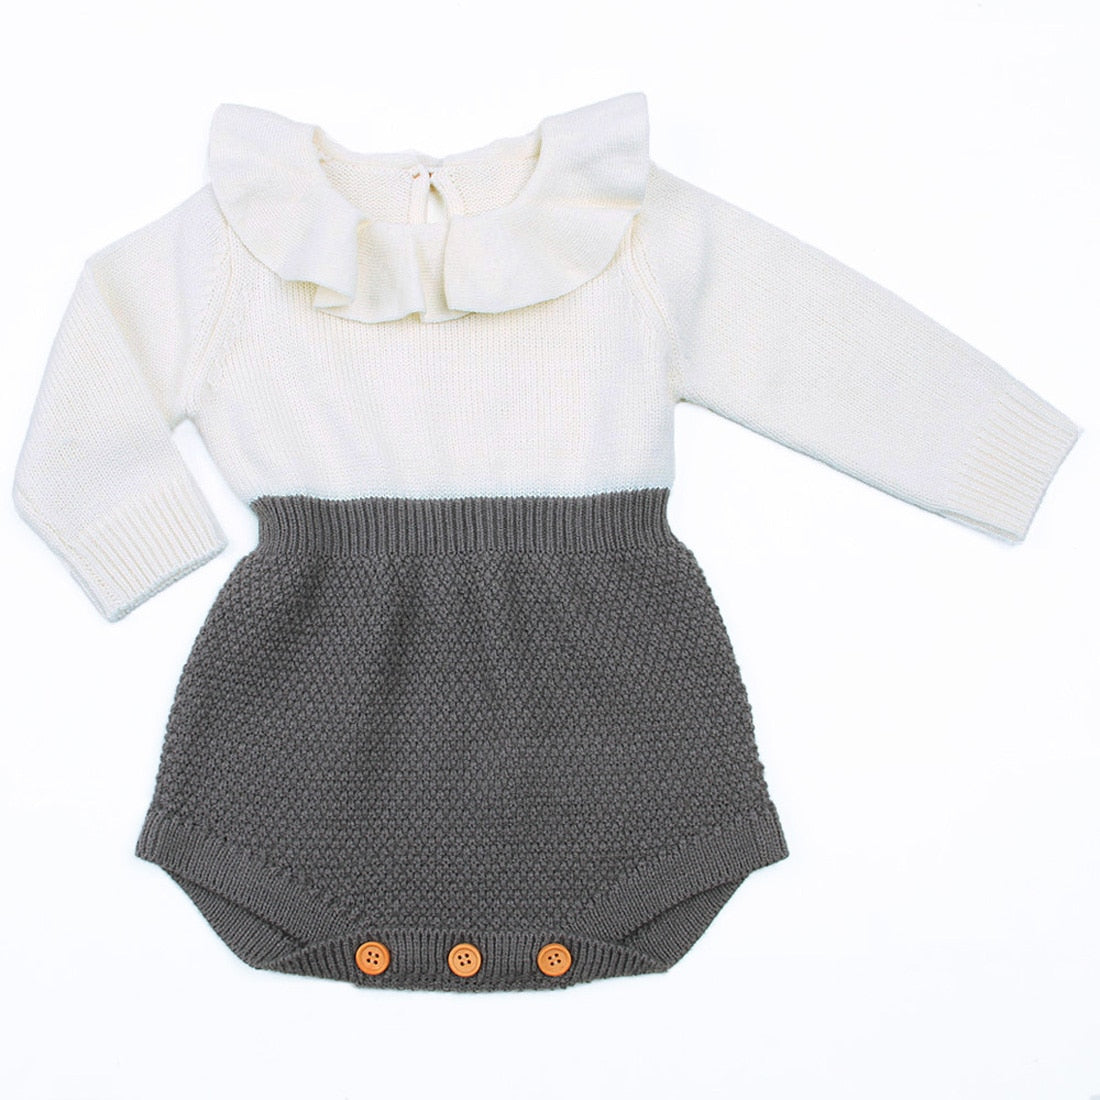 Cute Newborn Baby Girl Wool Knitting Tops Romper Shorts Warm Outfits  Clothes Winter sets - ebowsos